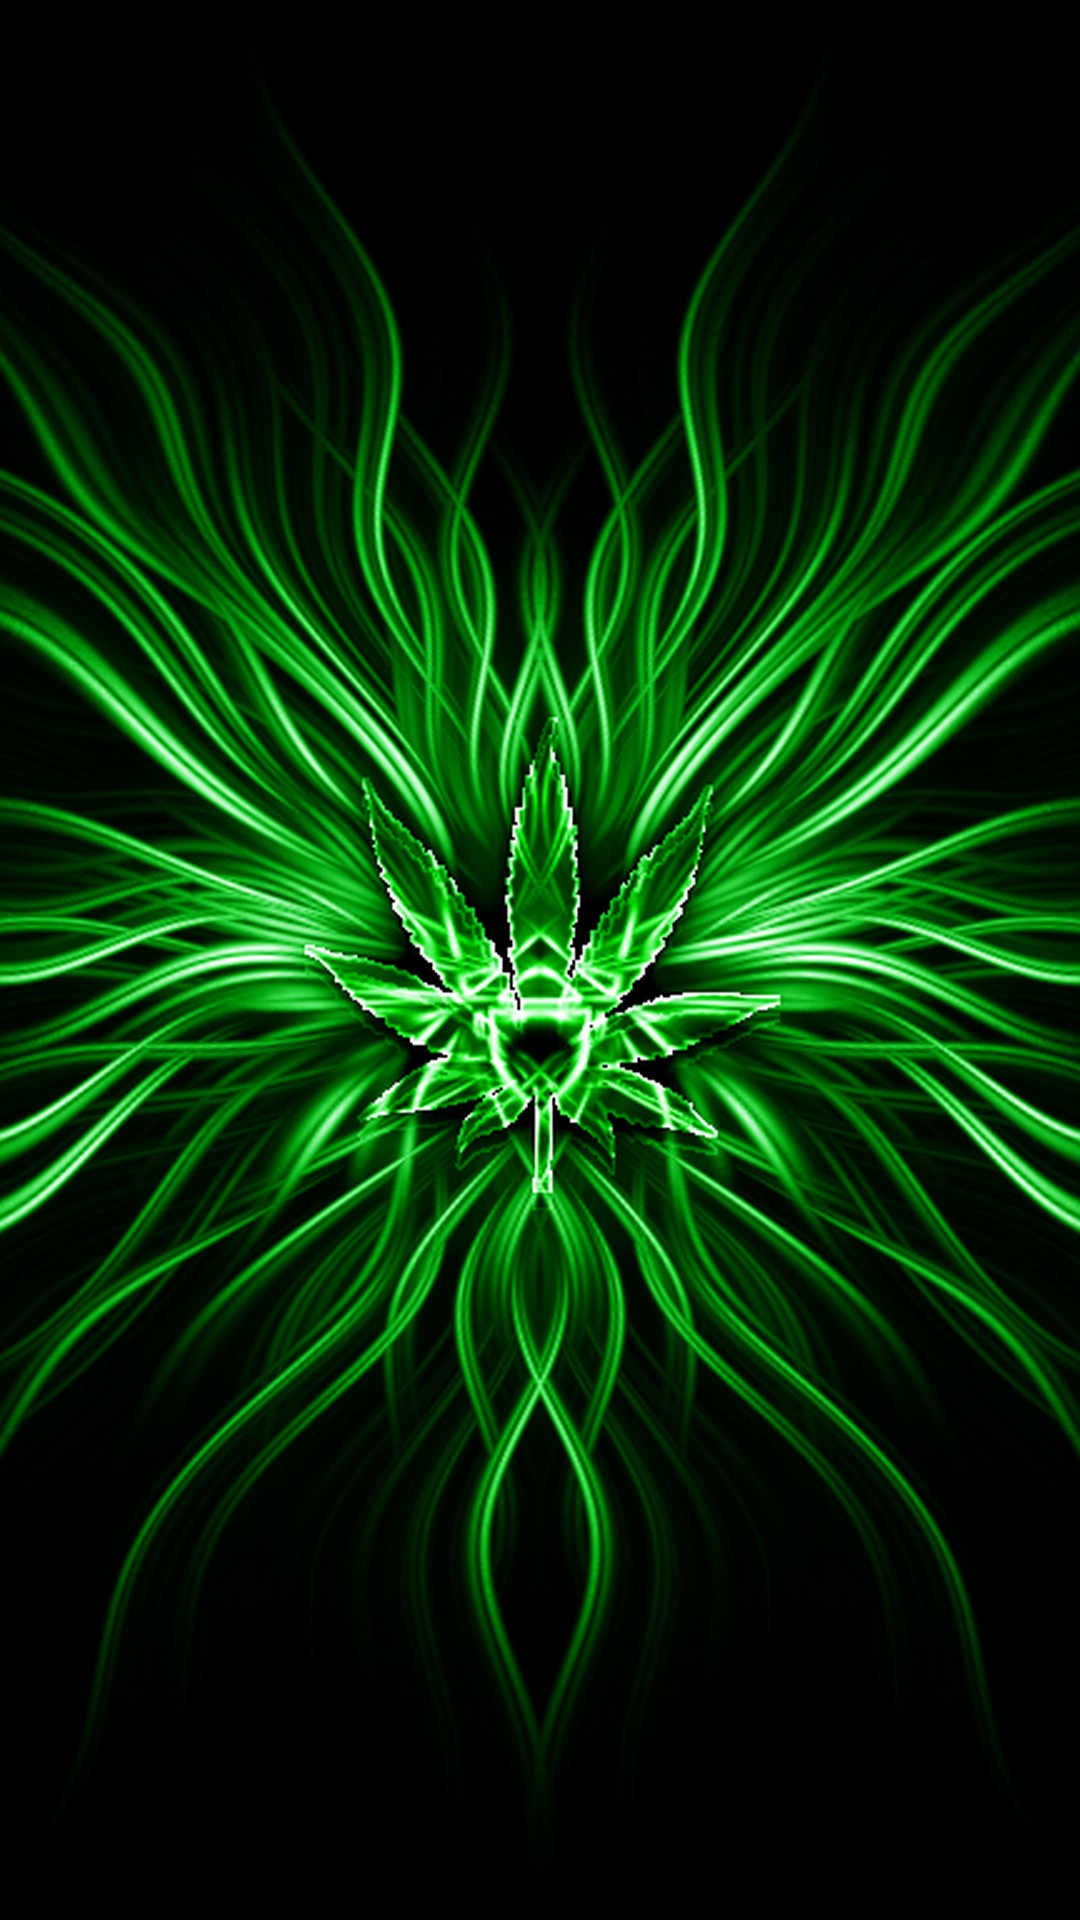 Neon Green Wallpaper iPhone with resolution 1080X1920 pixel. You can make this wallpaper for your iPhone 5, 6, 7, 8, X backgrounds, Mobile Screensaver, or iPad Lock Screen